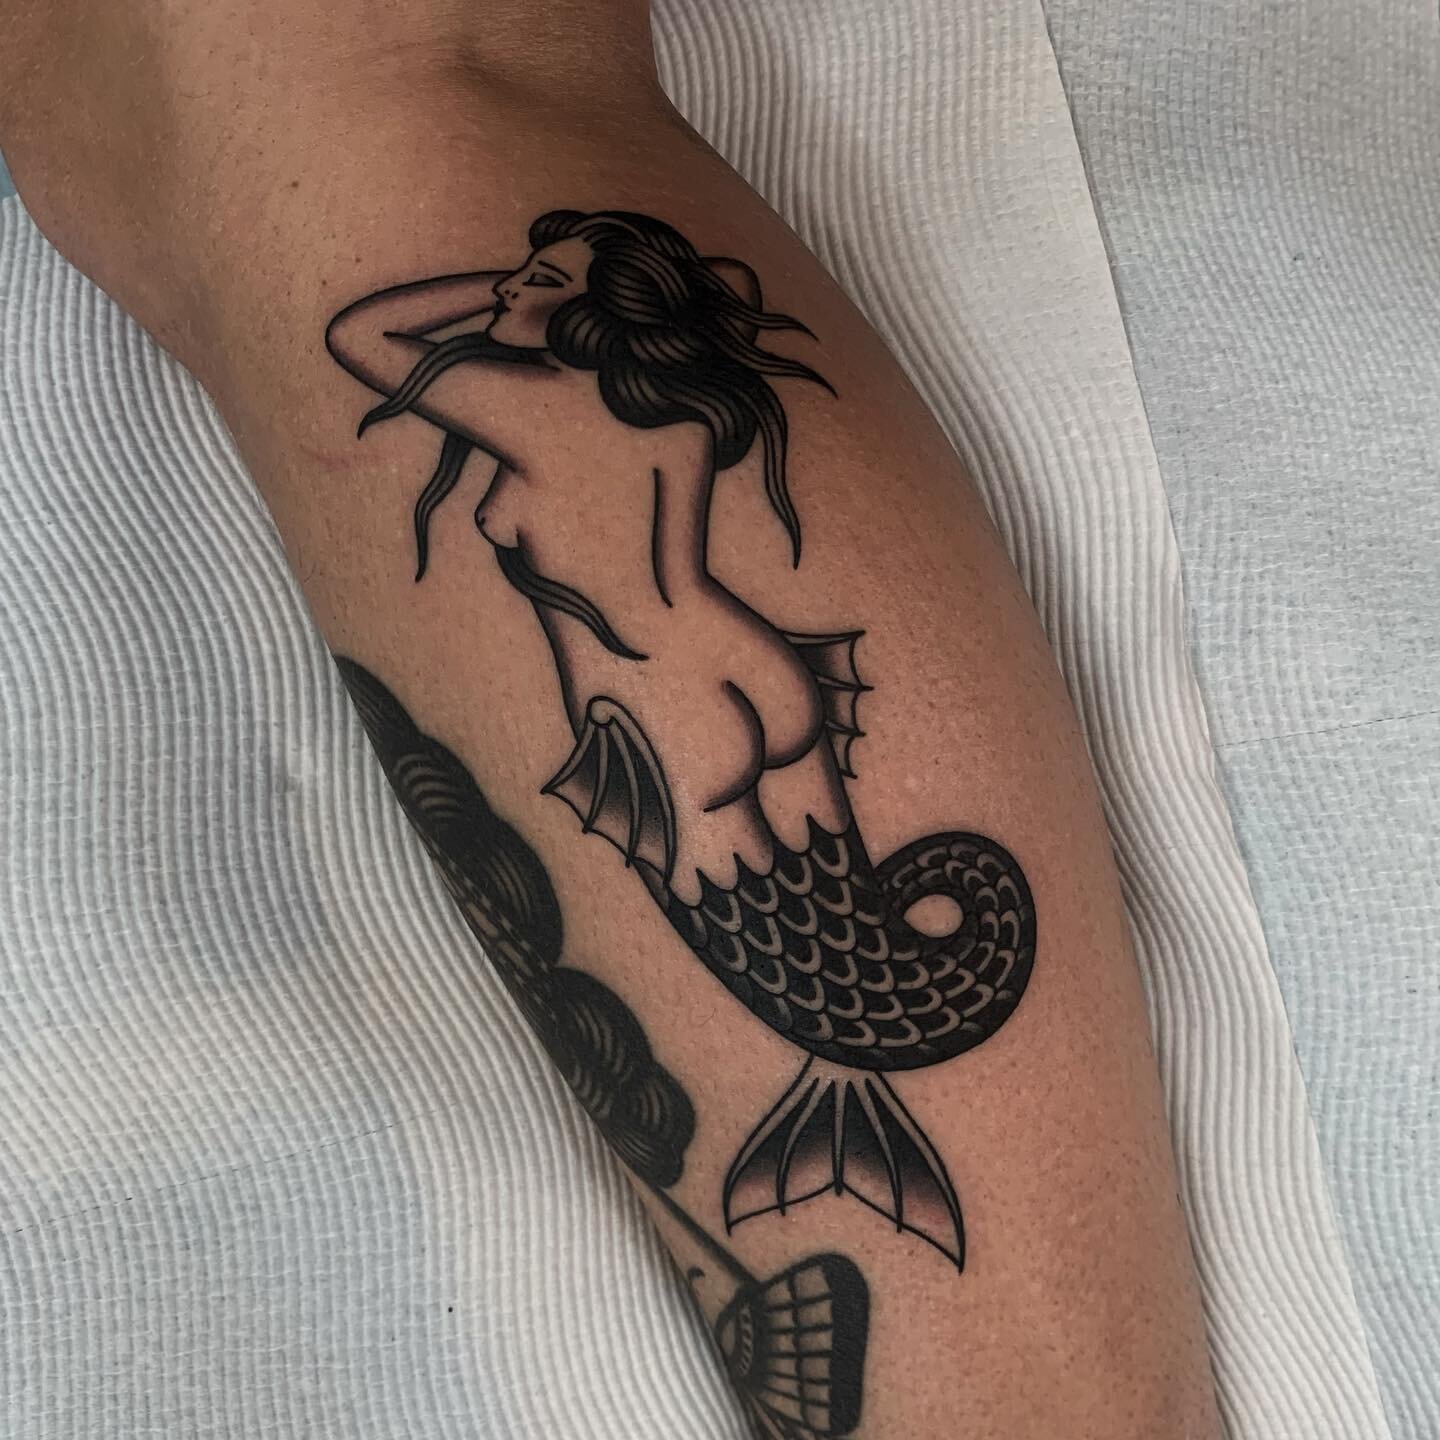 Mermaid I made today on good friend and amazing artist @stevieleatattoo thanks Stevo! 🖤